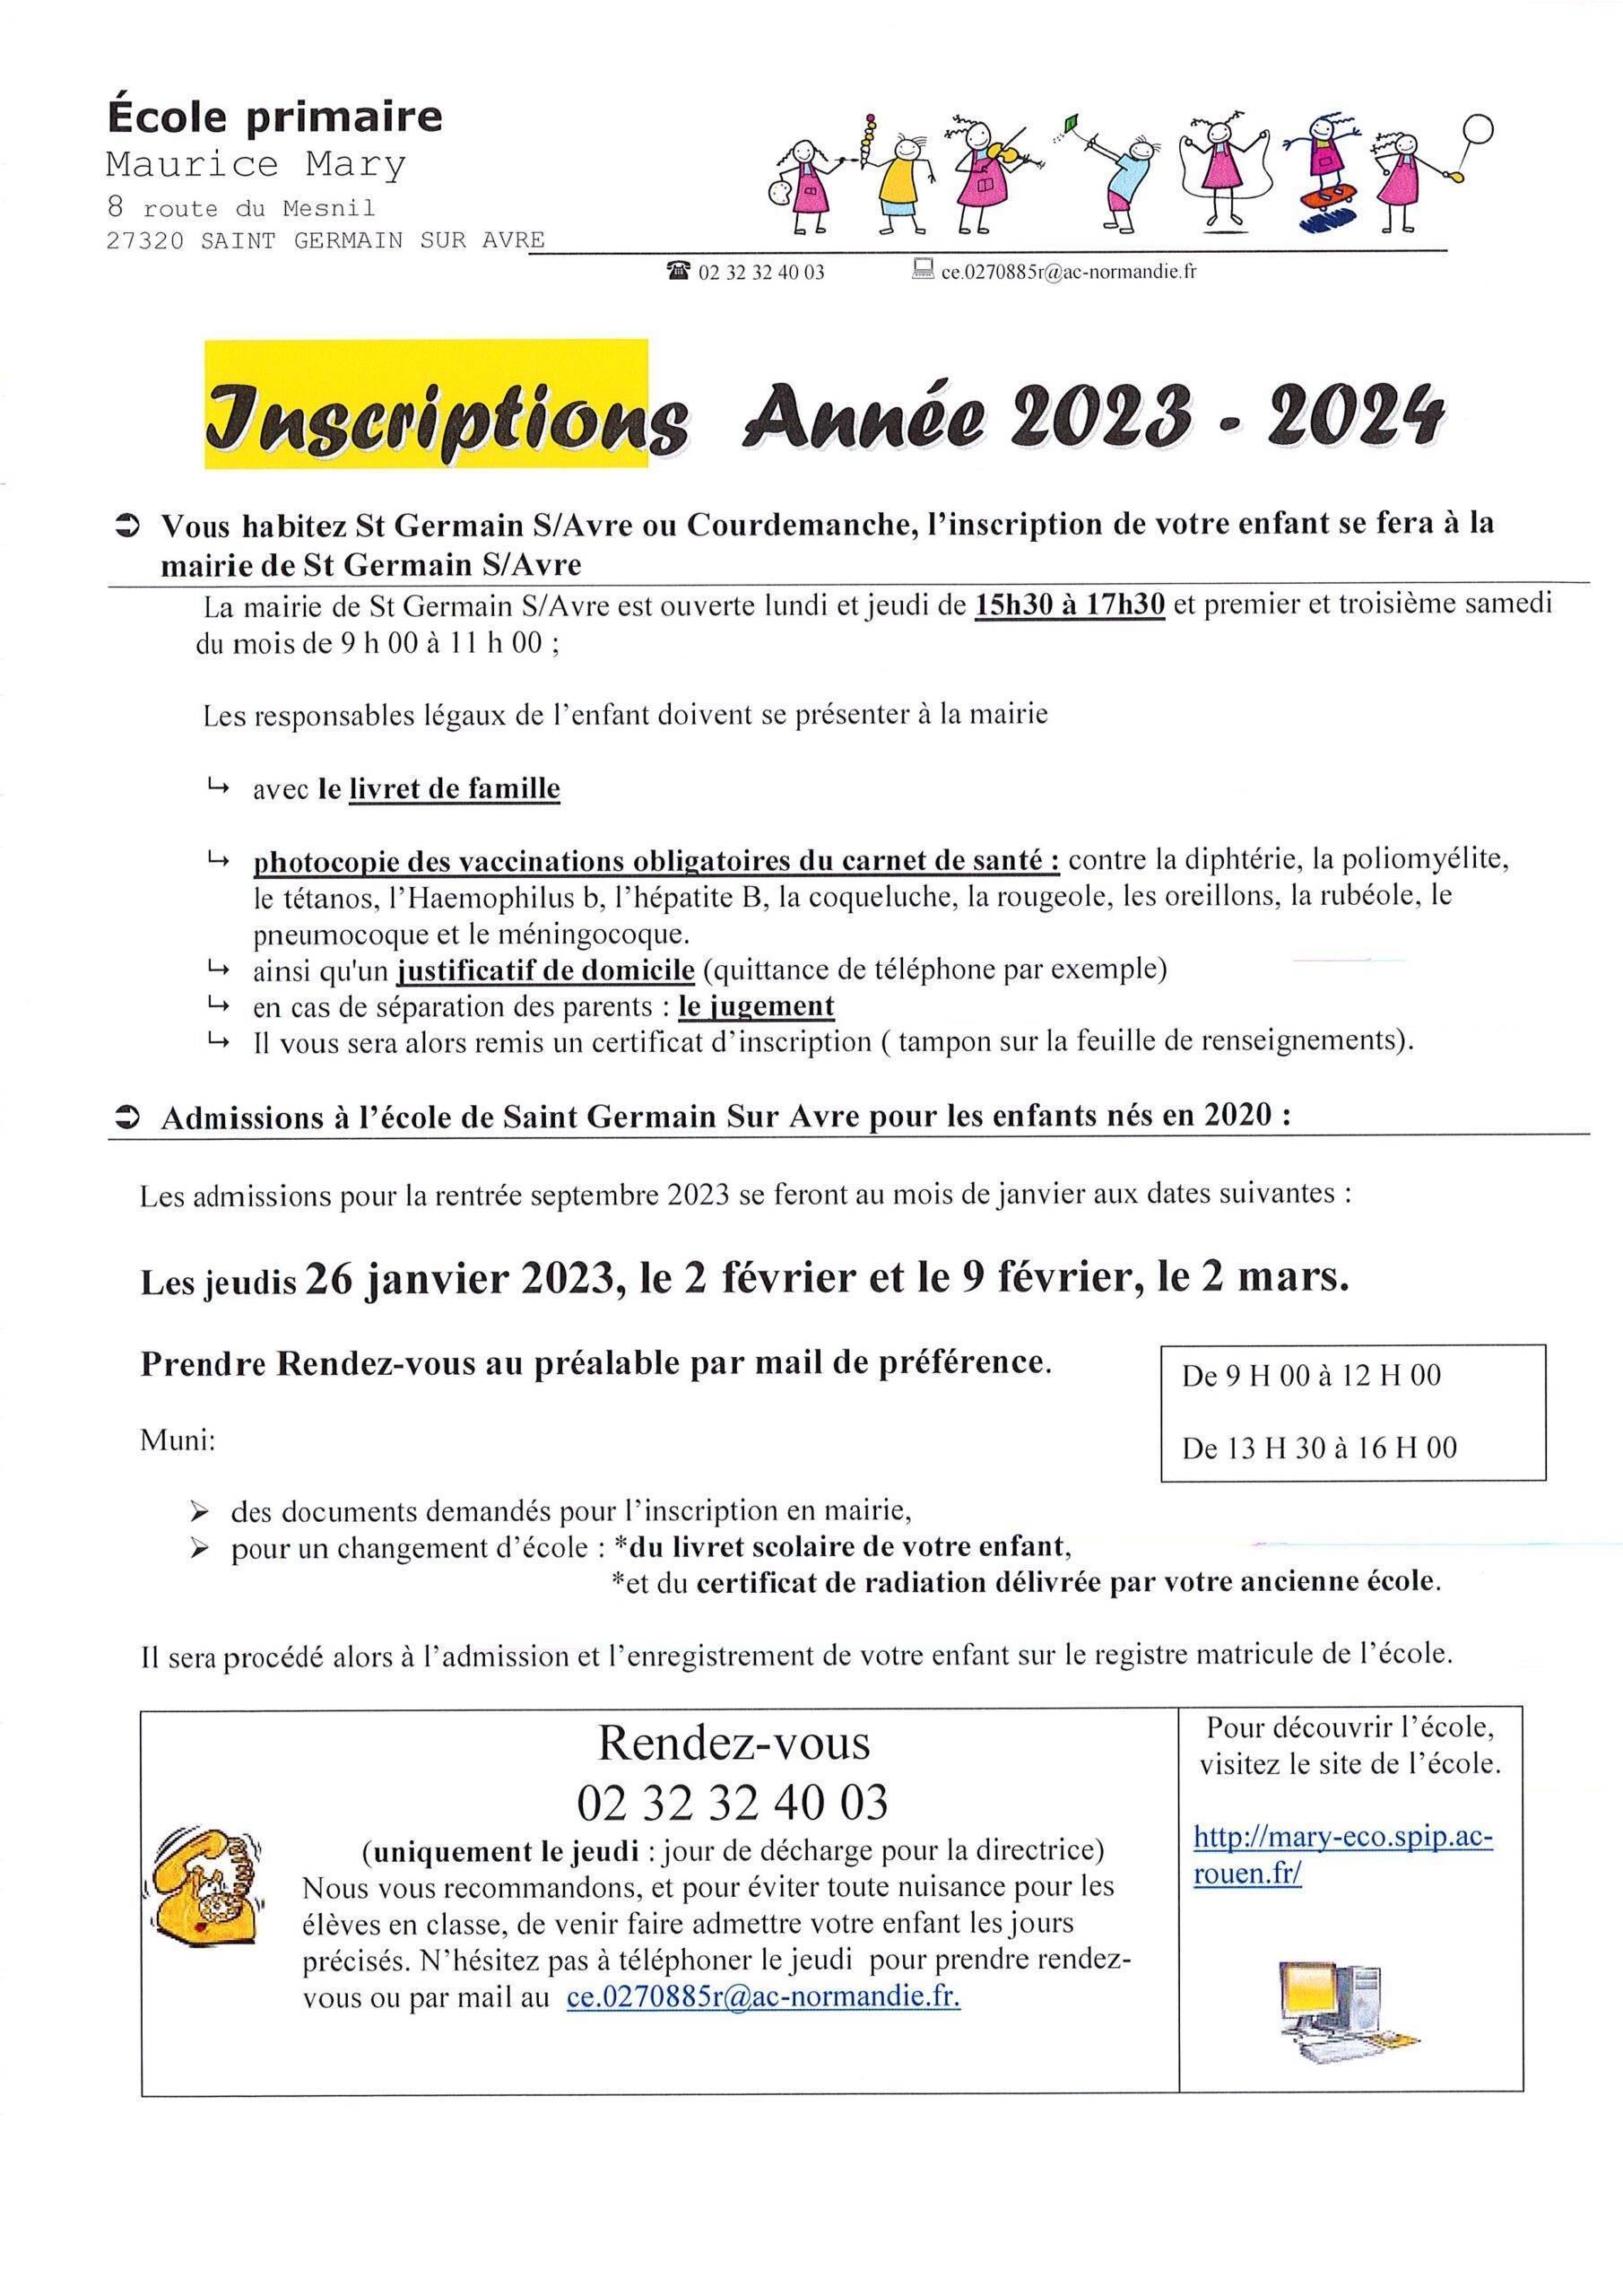 inscriptions ecole St Germlain Courdemanche 2023 2024 scaled